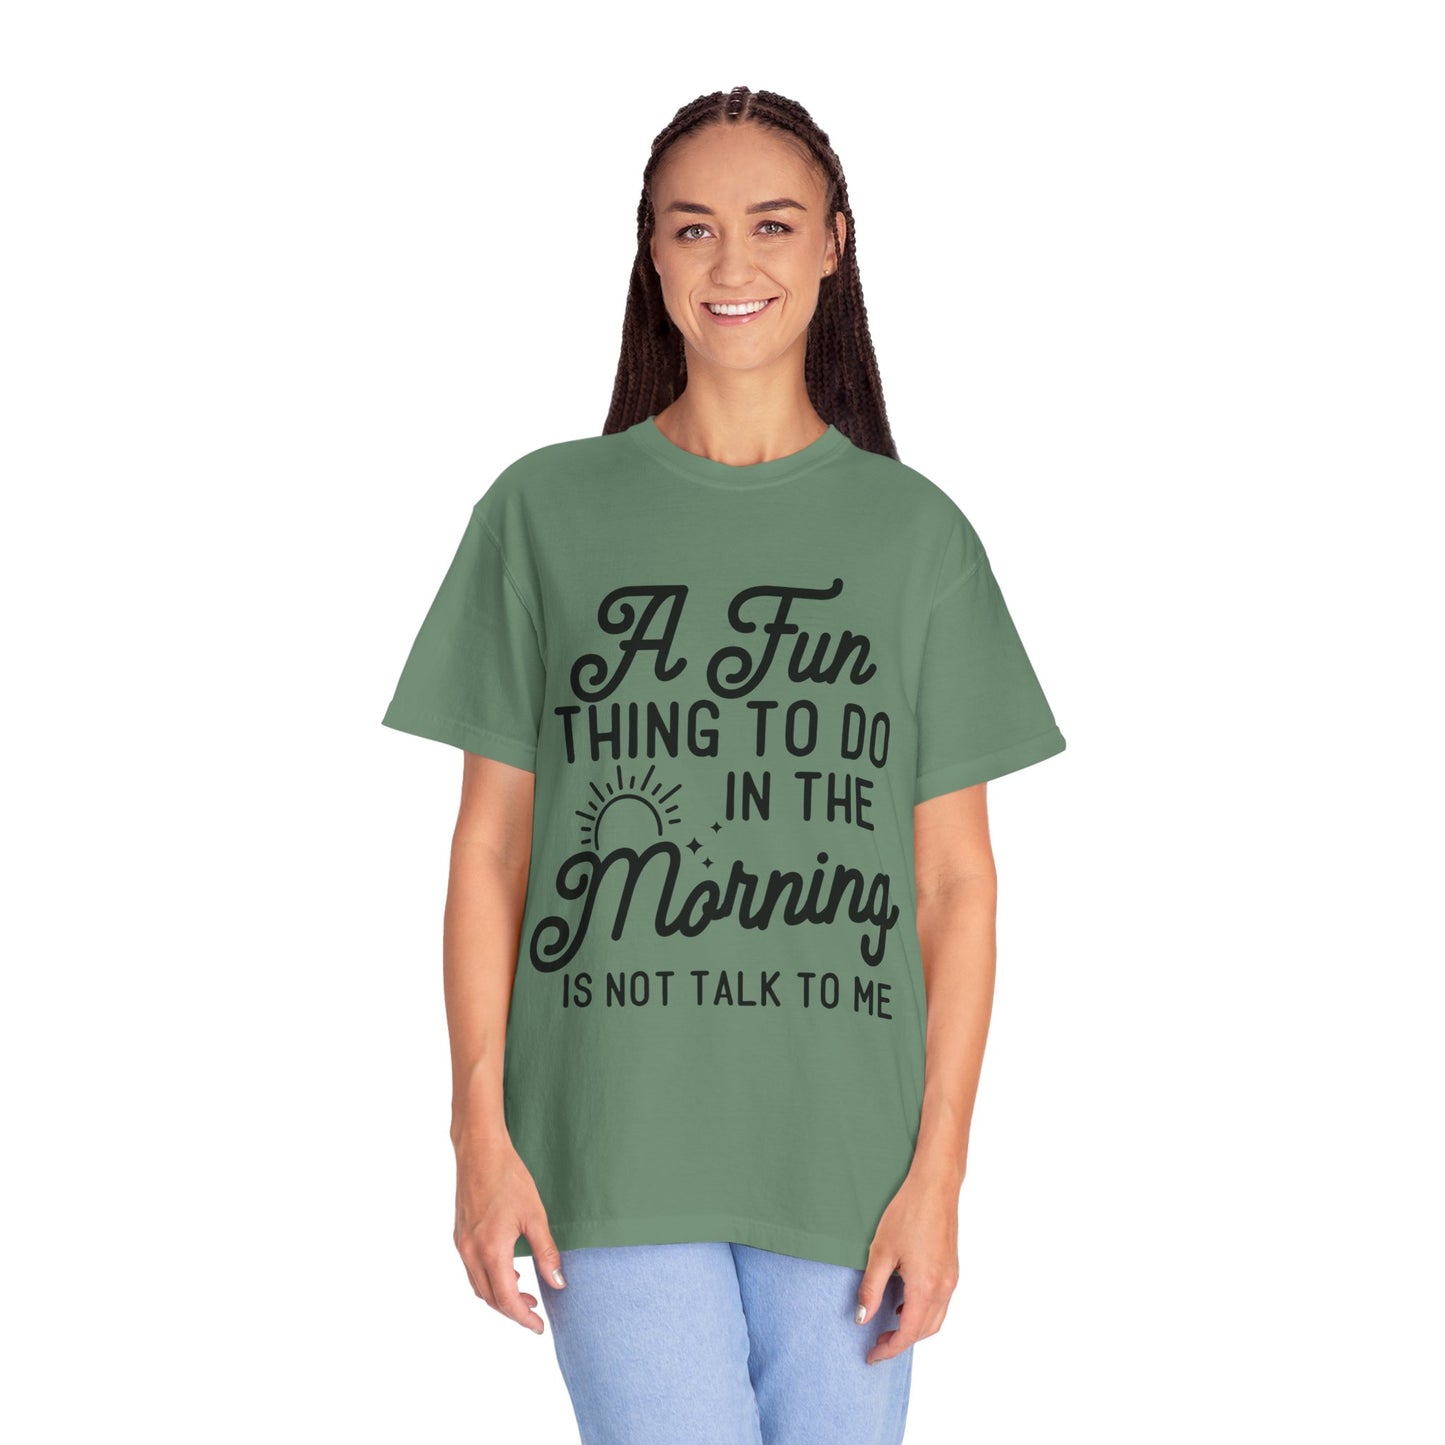 Don't talk to me in the morning - Unisex Garment-Dyed T-shirt